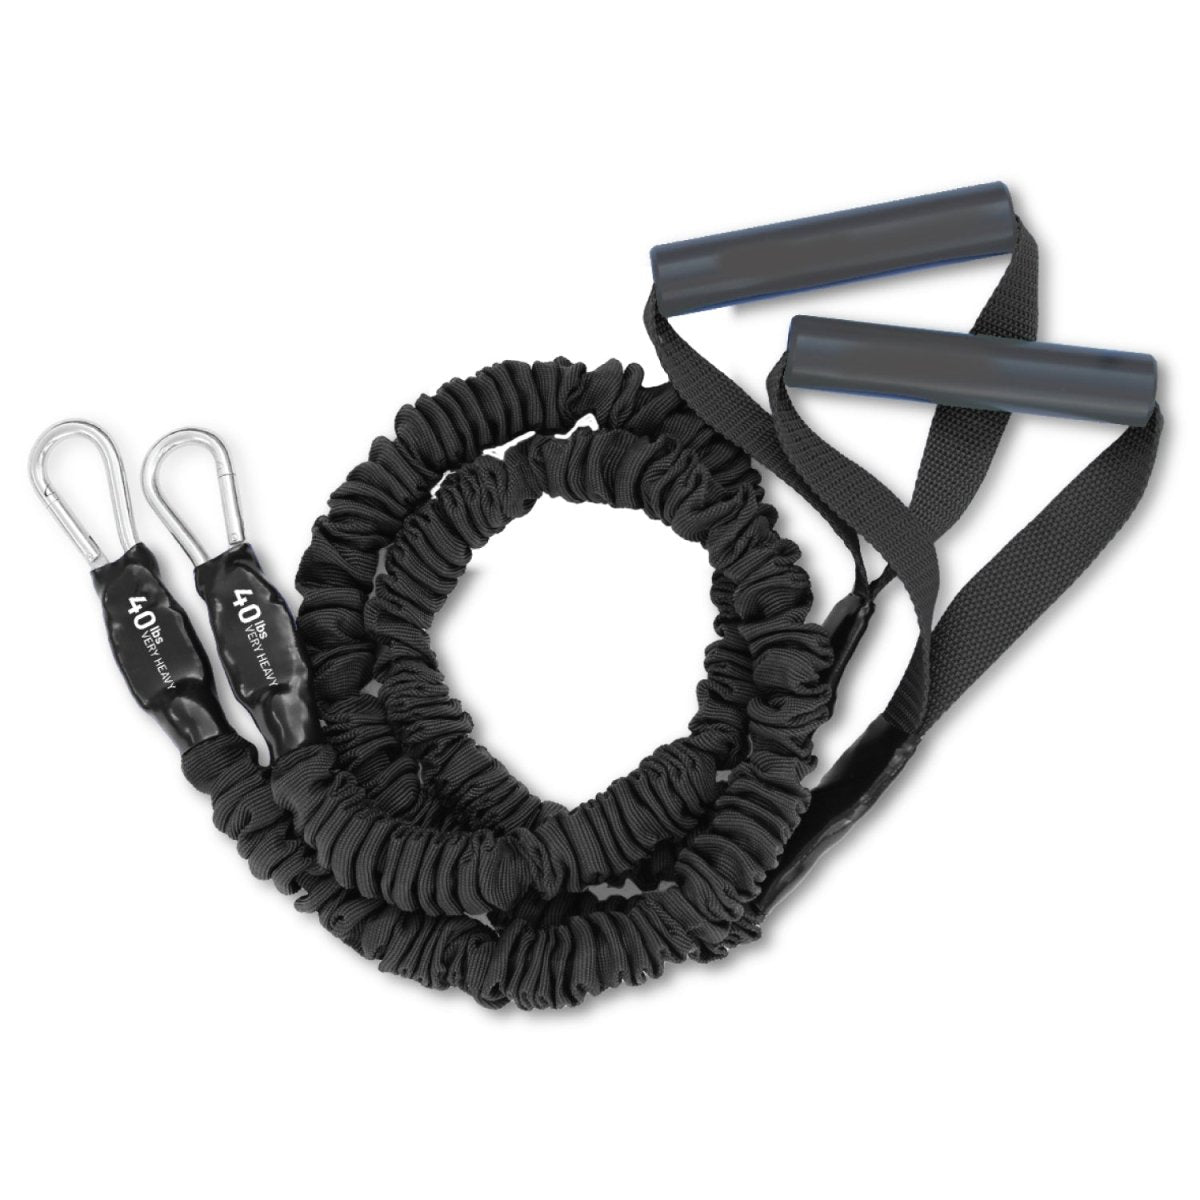 If you need shoulder or back definition, this set of bands is the one for you.  The 40lb of  accurate resistance will challenge even the buffest of bodybuilders, and help define the smaller muscles in your upper body.